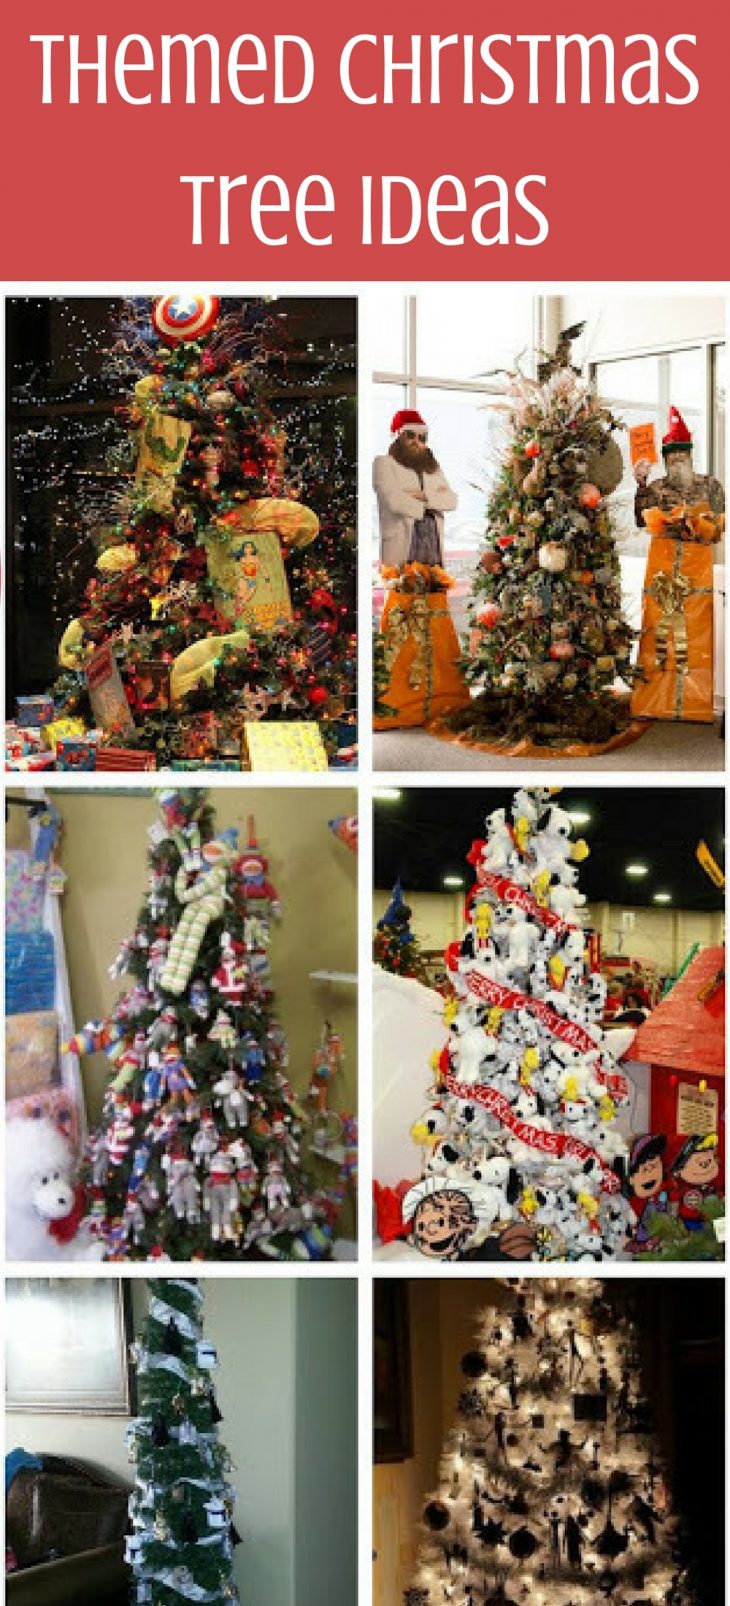 Themed Christmas Tree Ideas - Just Short of Crazy